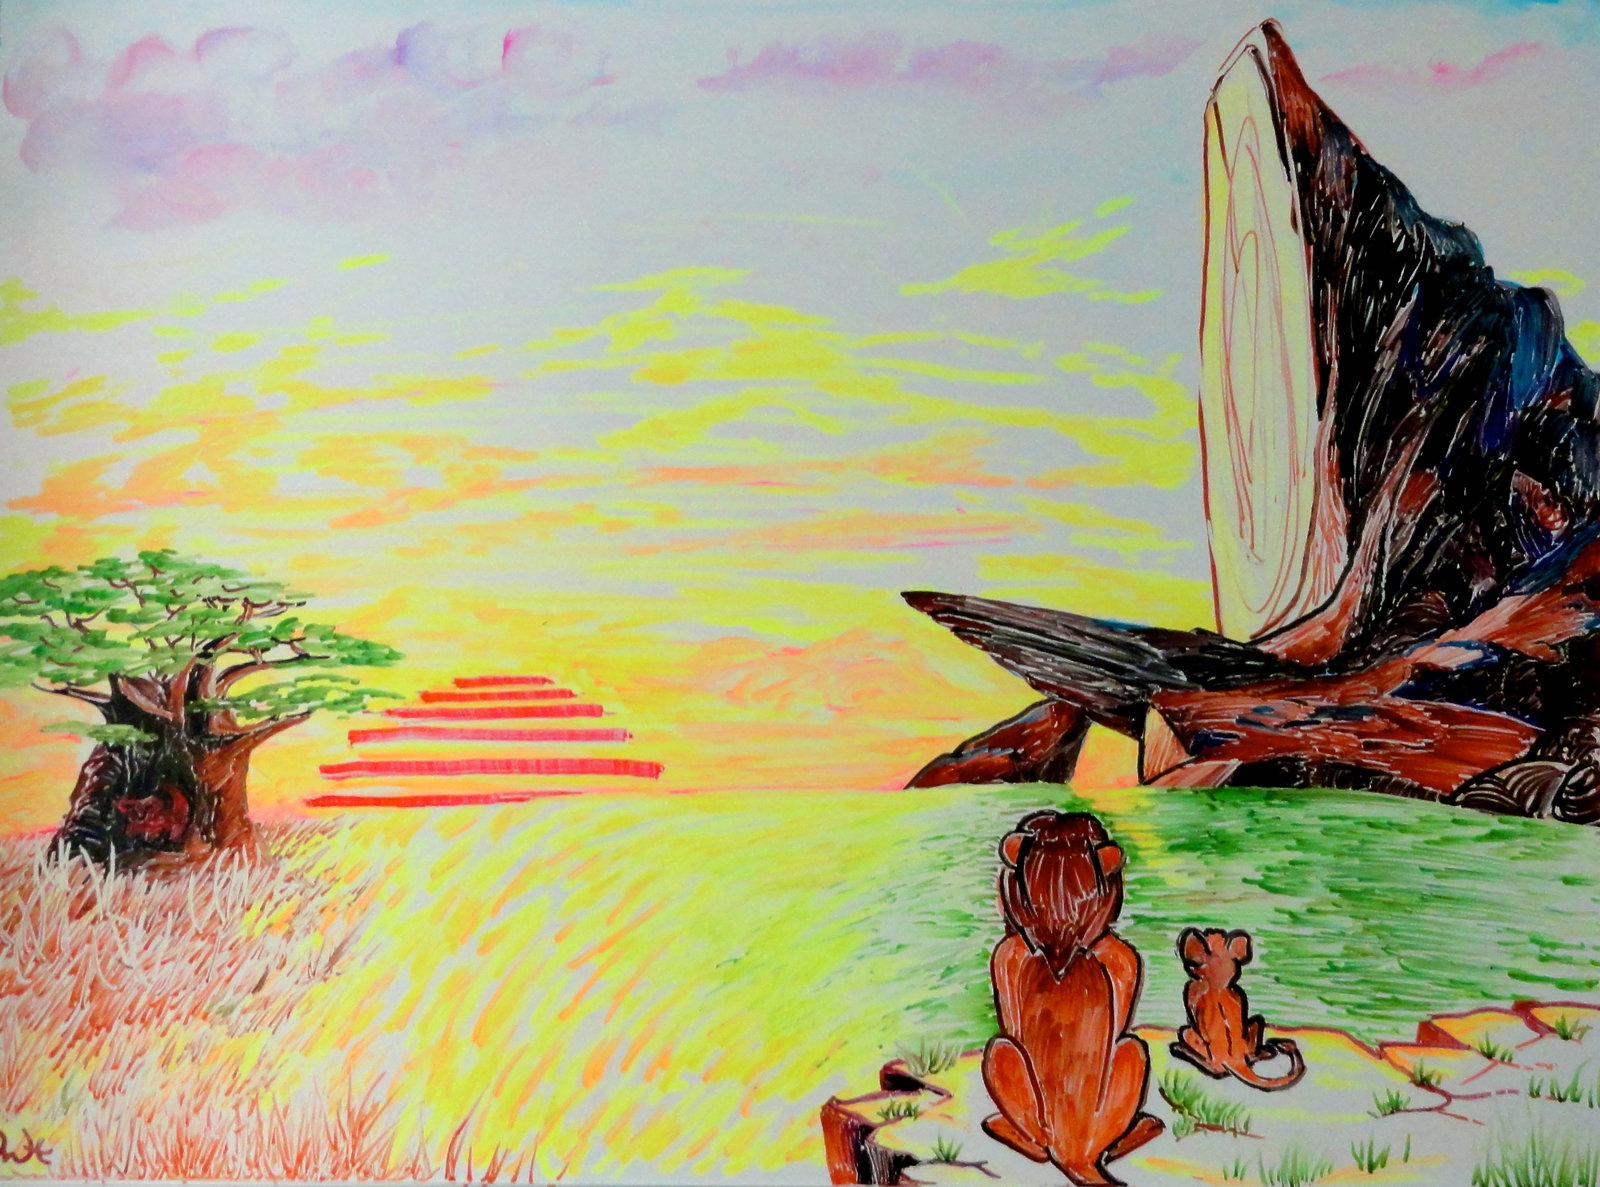 The Lion King - Whiteboard Drawing by Manukahoney7 on Clipart library